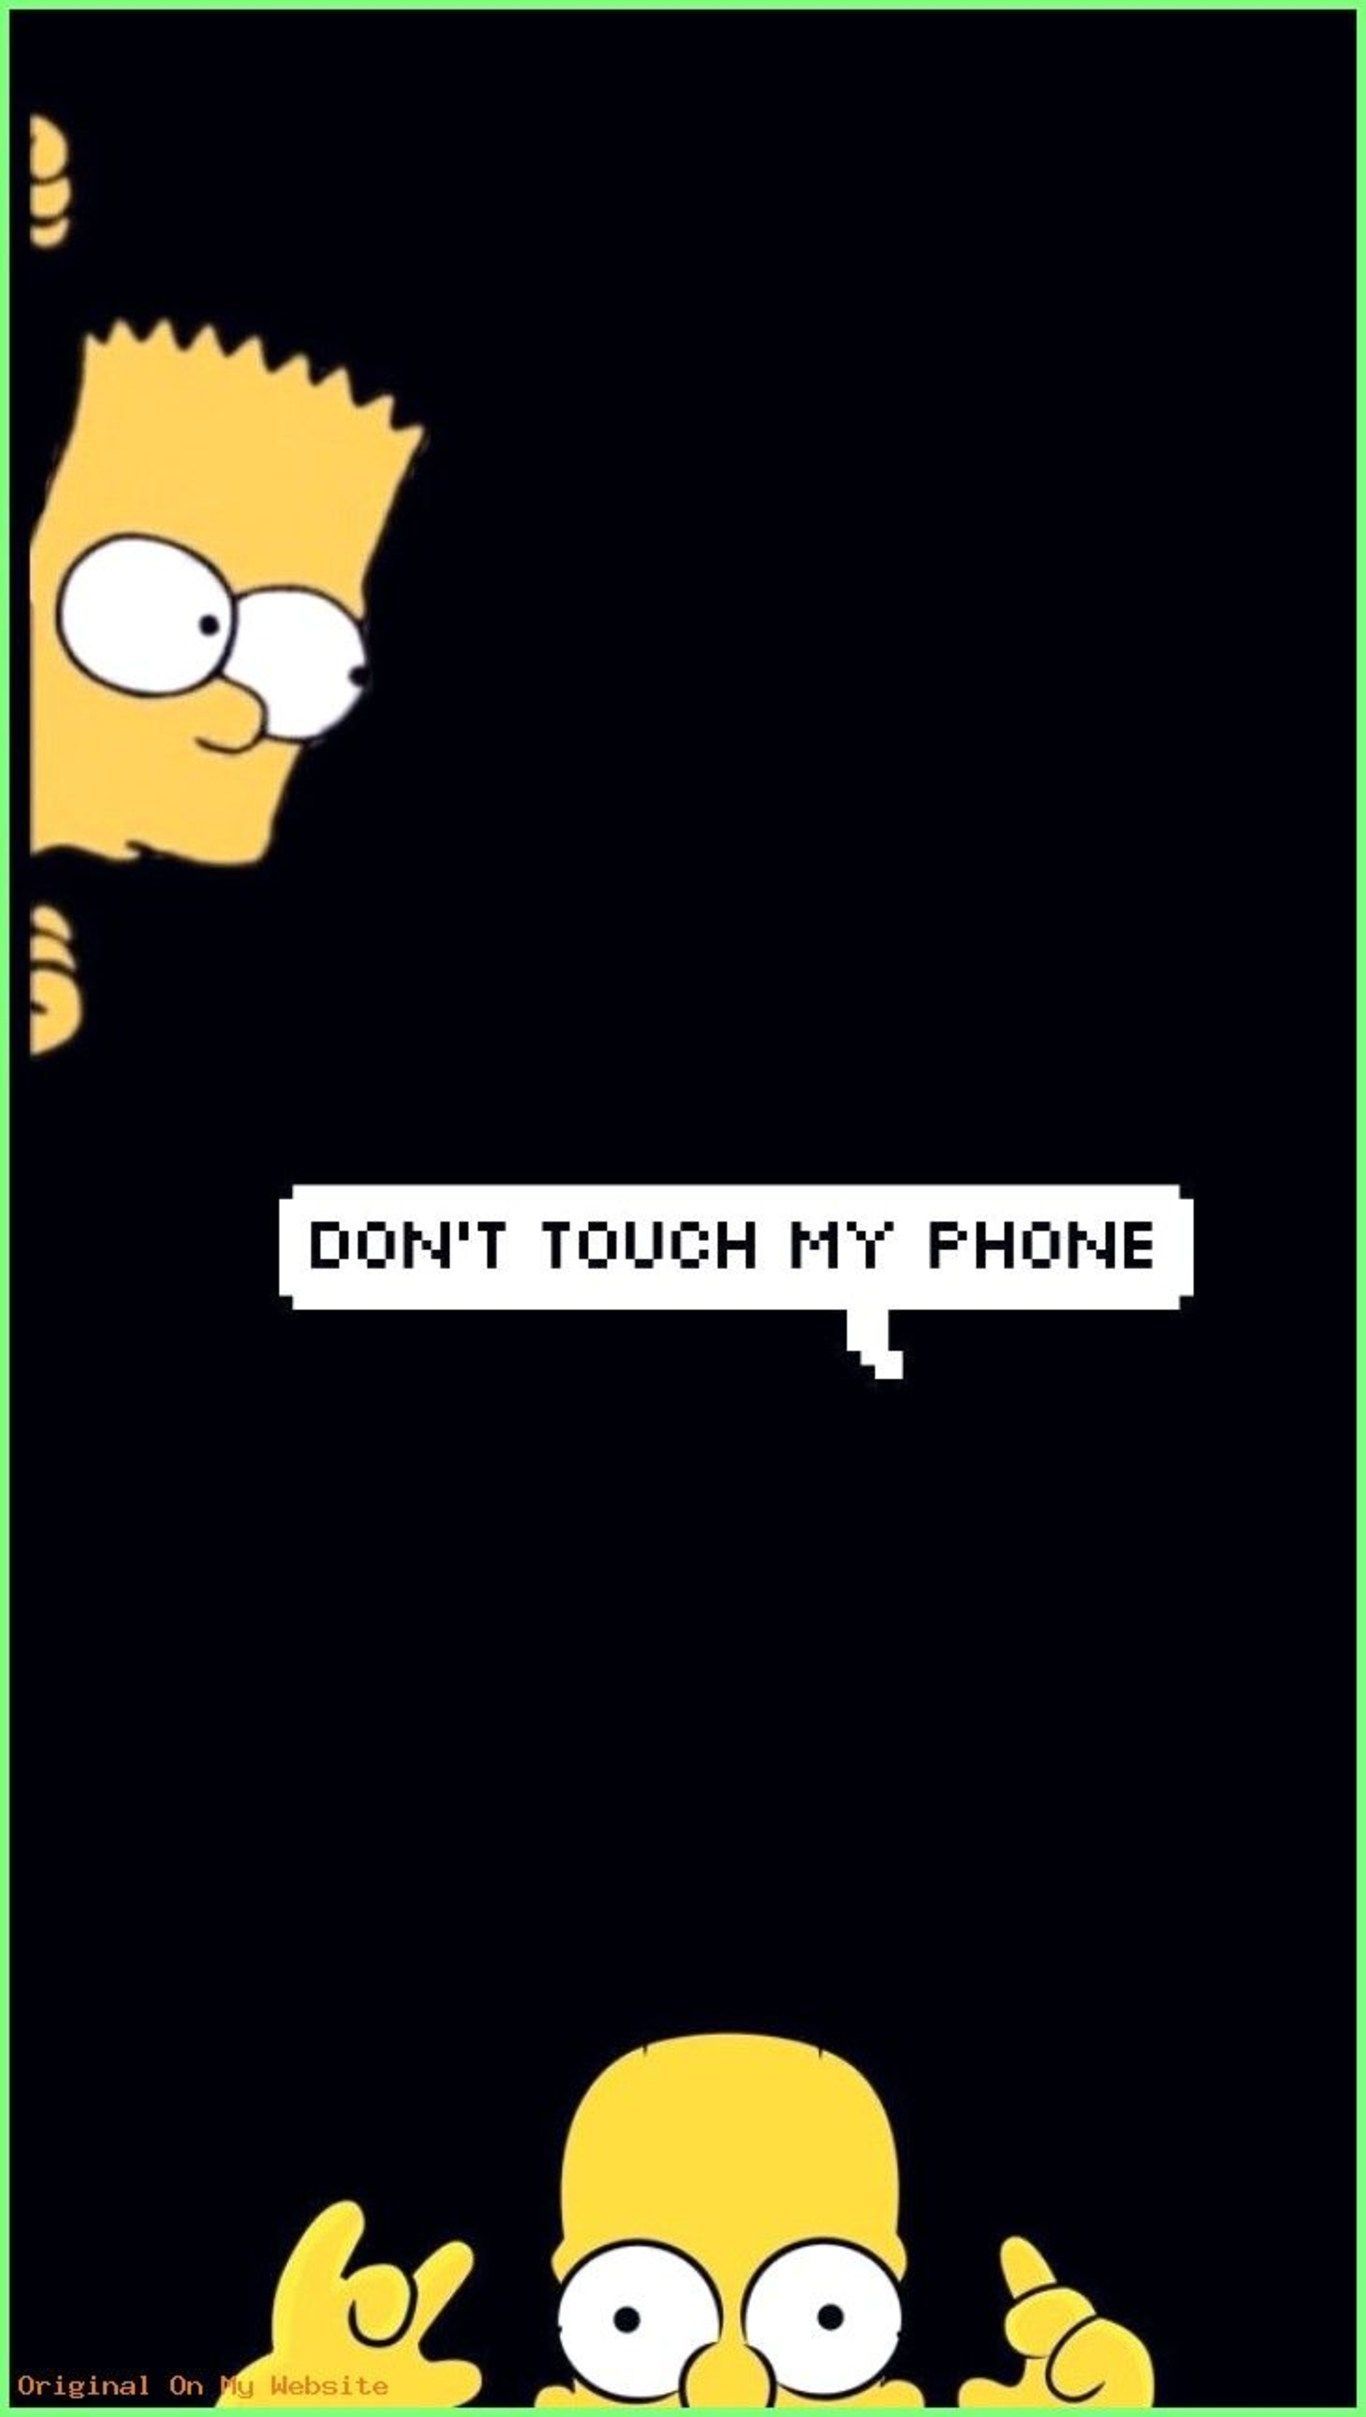 The simpsons don't touch my phone - Don't touch my phone